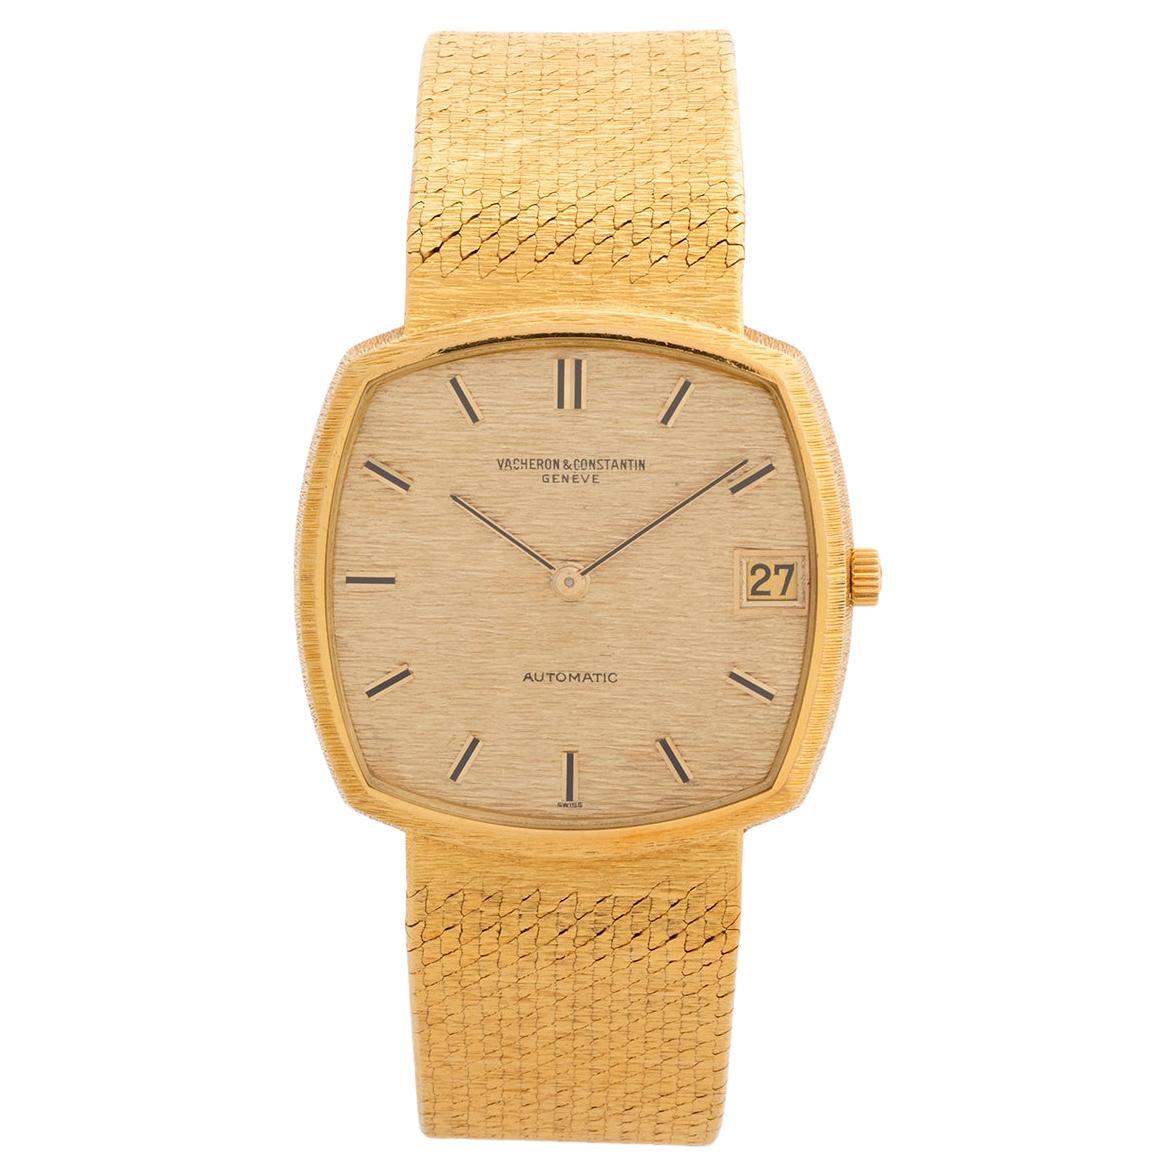 Our very rare and exquisite vintage Vacheron Constantin features an 18k yellow gold case with a beautiful bark effect dial and integrated 18k yellow gold milanese bark bracelet which combined, measures 180mm. The case of 32 x 32mm perfectly evokes